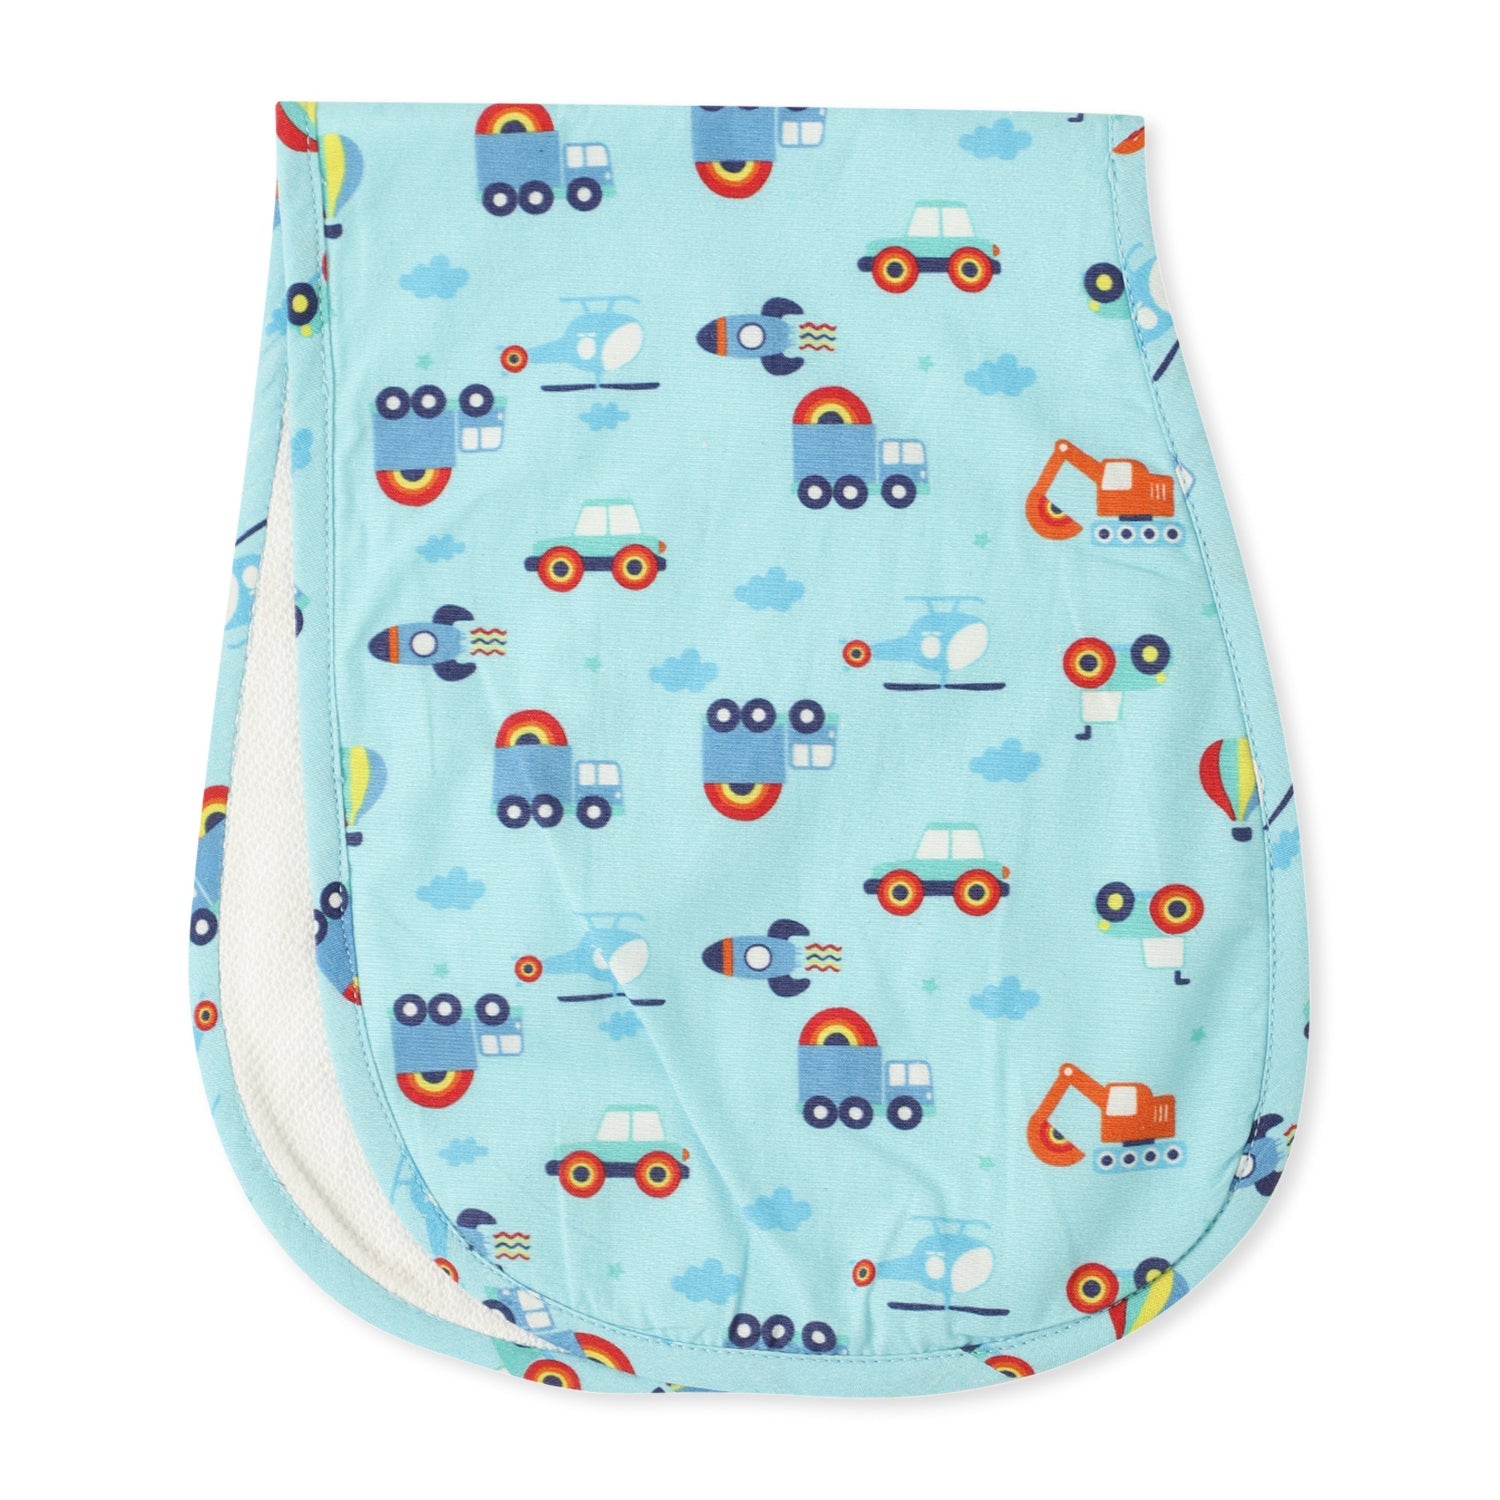 Giggles & Wiggles Time To Fly Cotton Soft Burp Cloth (Set of 3)